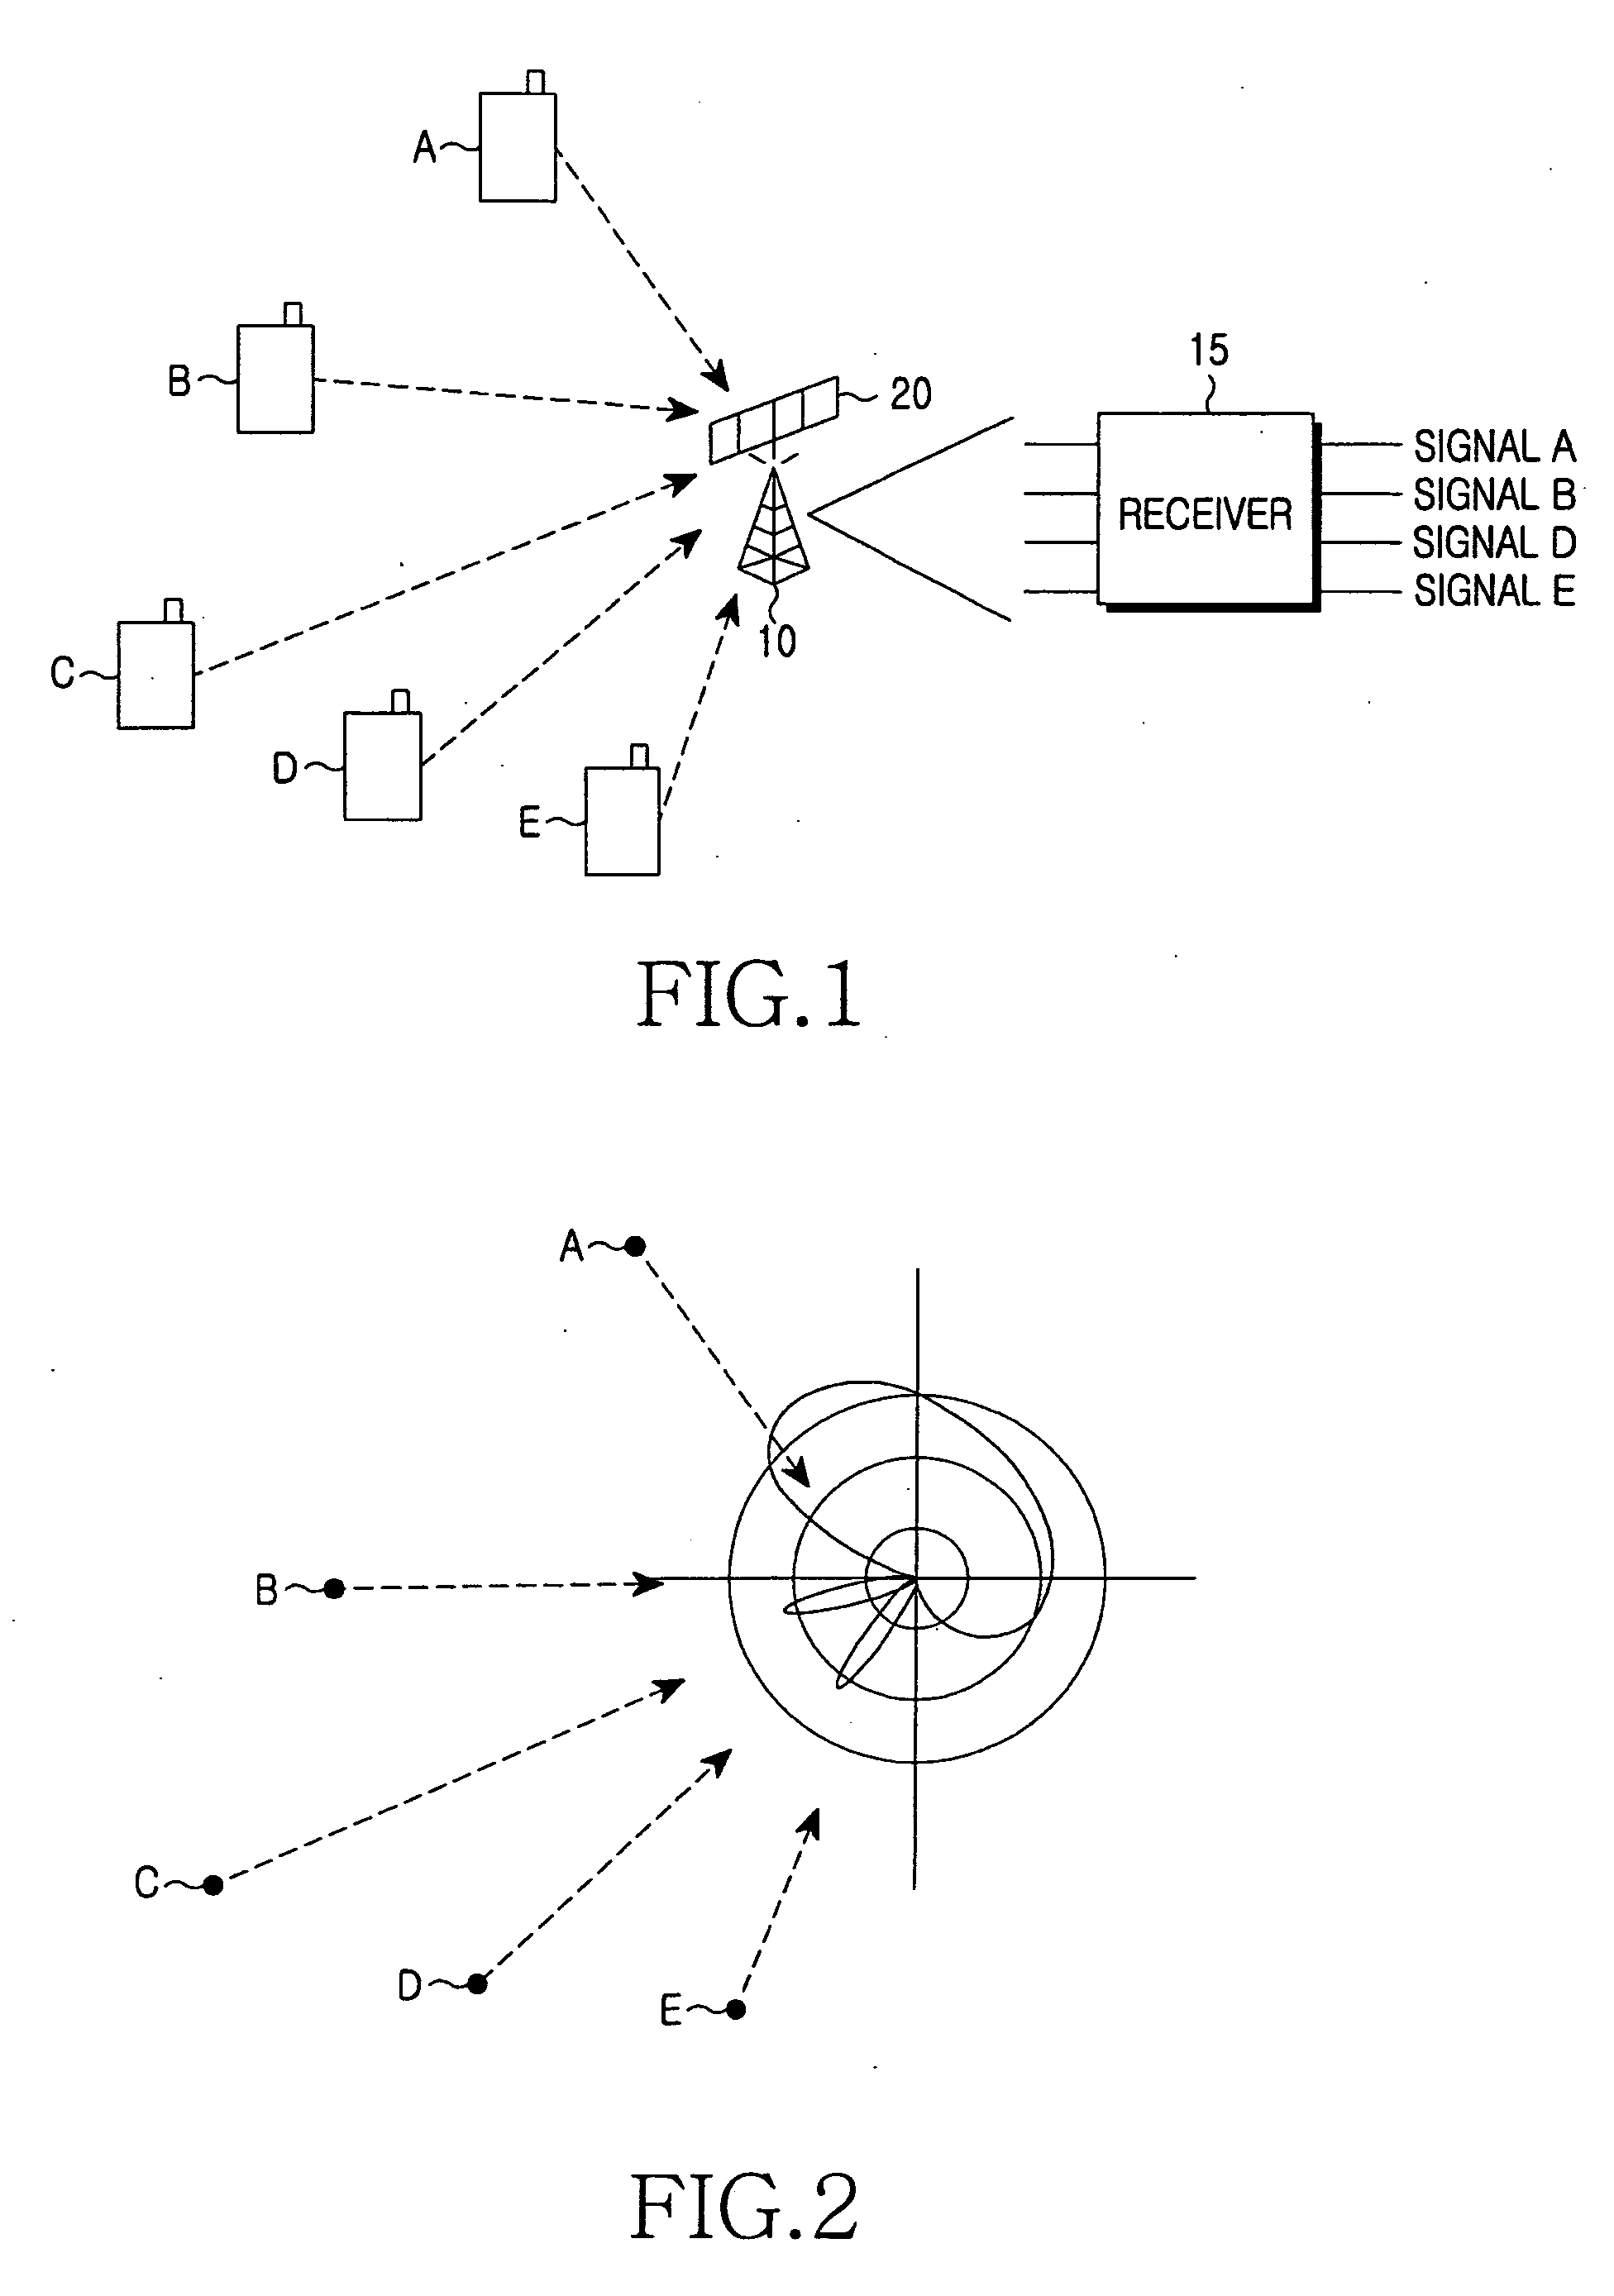 Interference power measurement apparatus and method for space-time beam forming